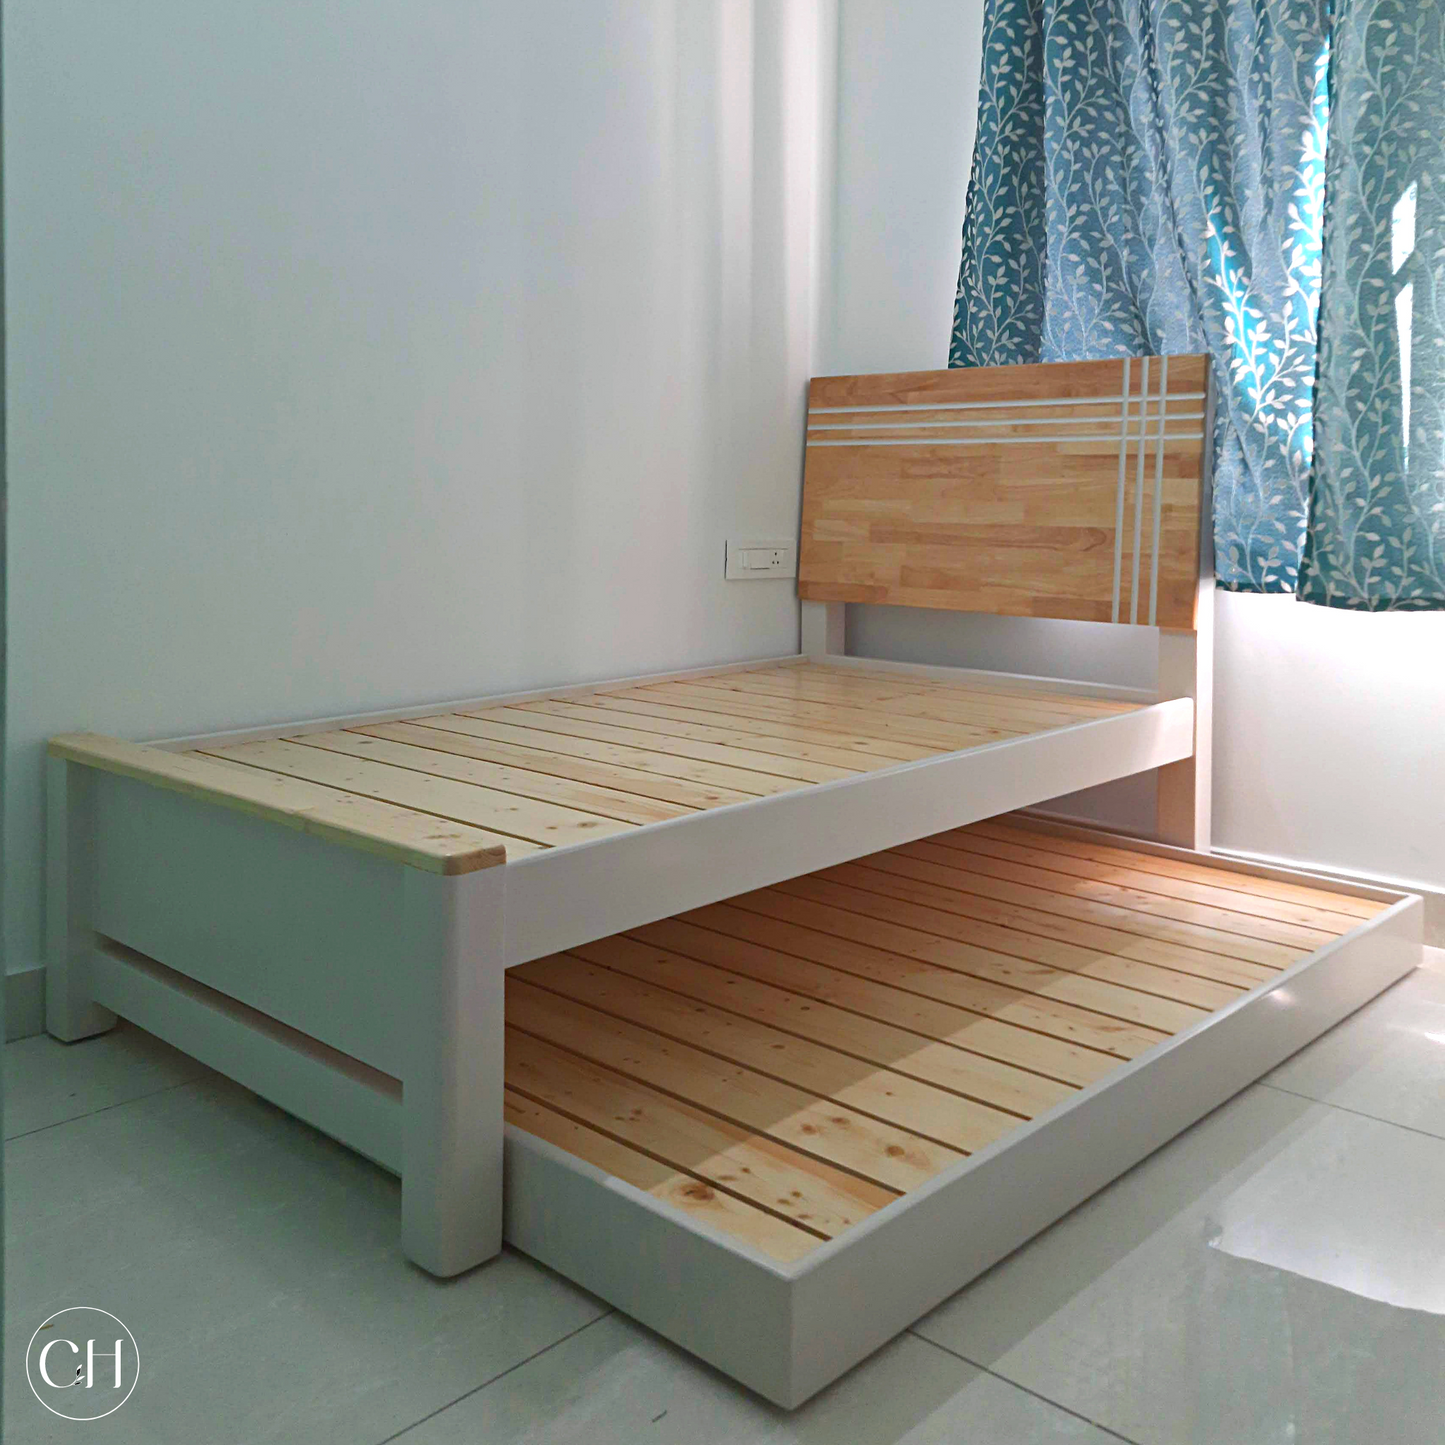 CustHum Stardust - solid wood bed with trundle in natural pine and white finish and headboard with inlaid paintwork (ISO, trundle open)